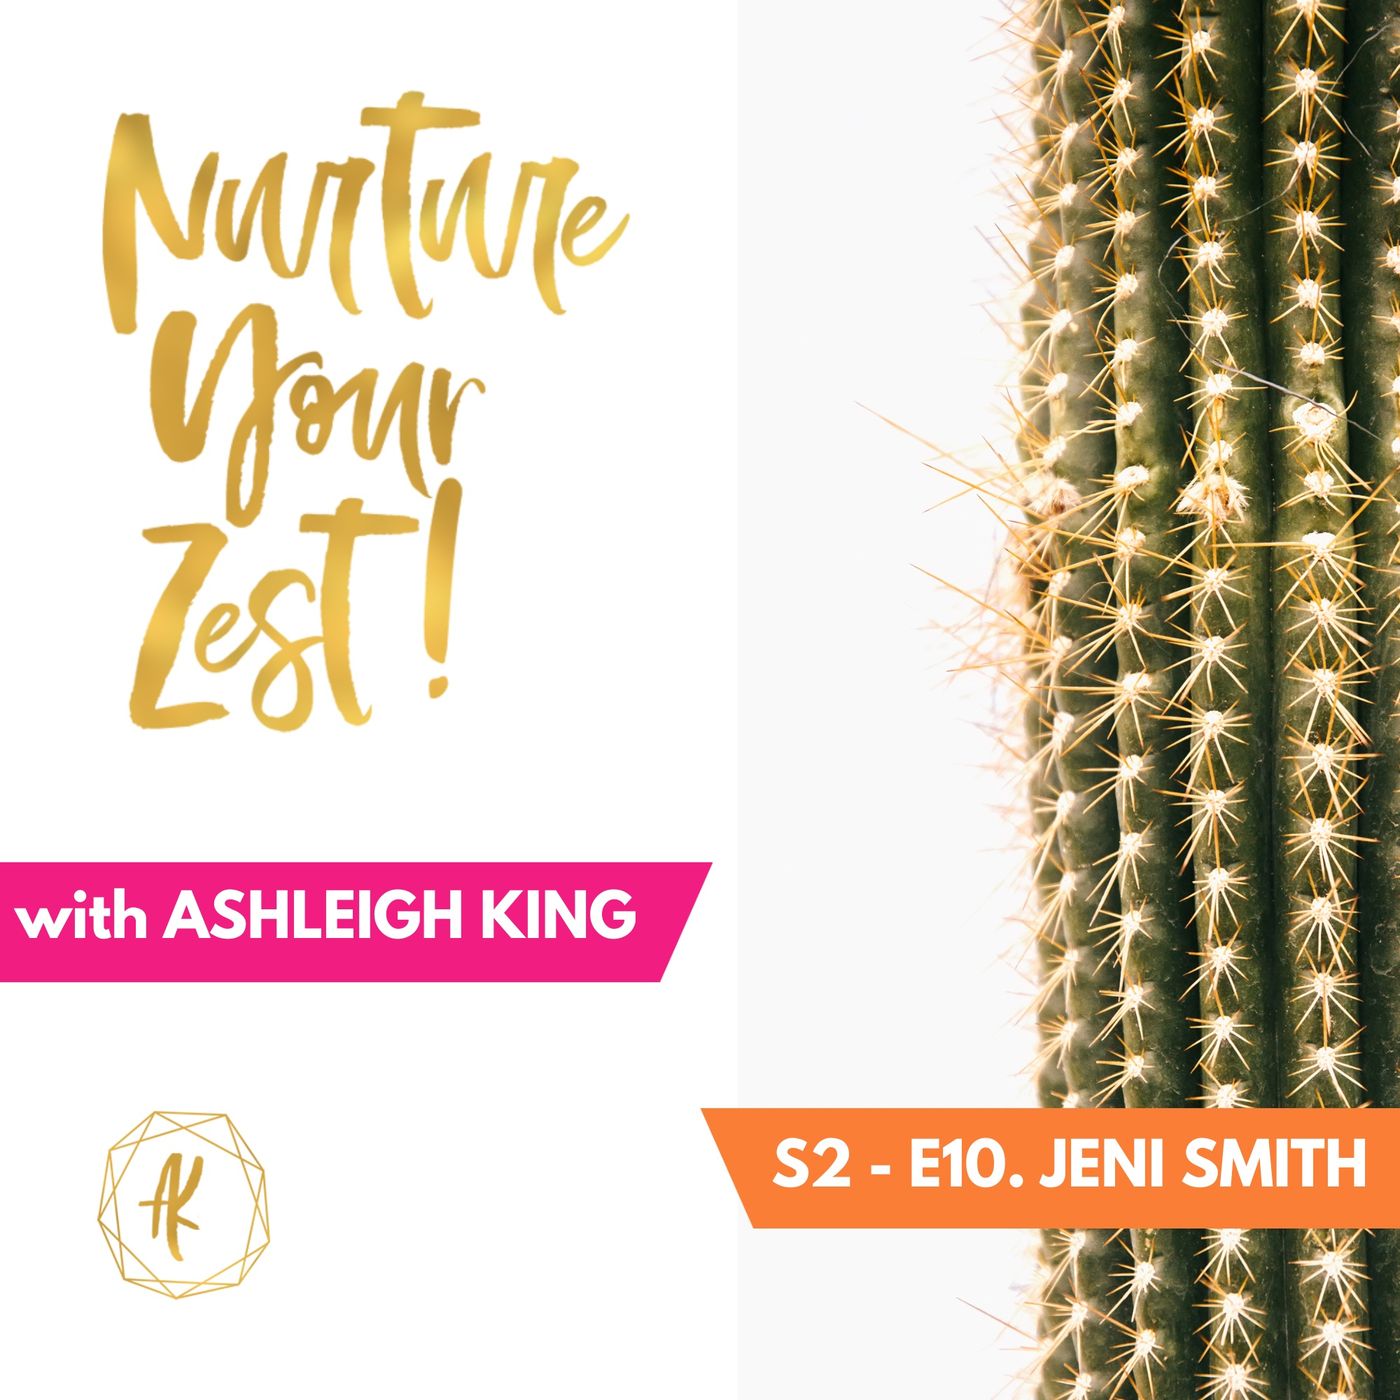 #Nurture Your Zest S2-E10 Jeni Smith on strategic networking, giving up alcohol & coping with miscarriage